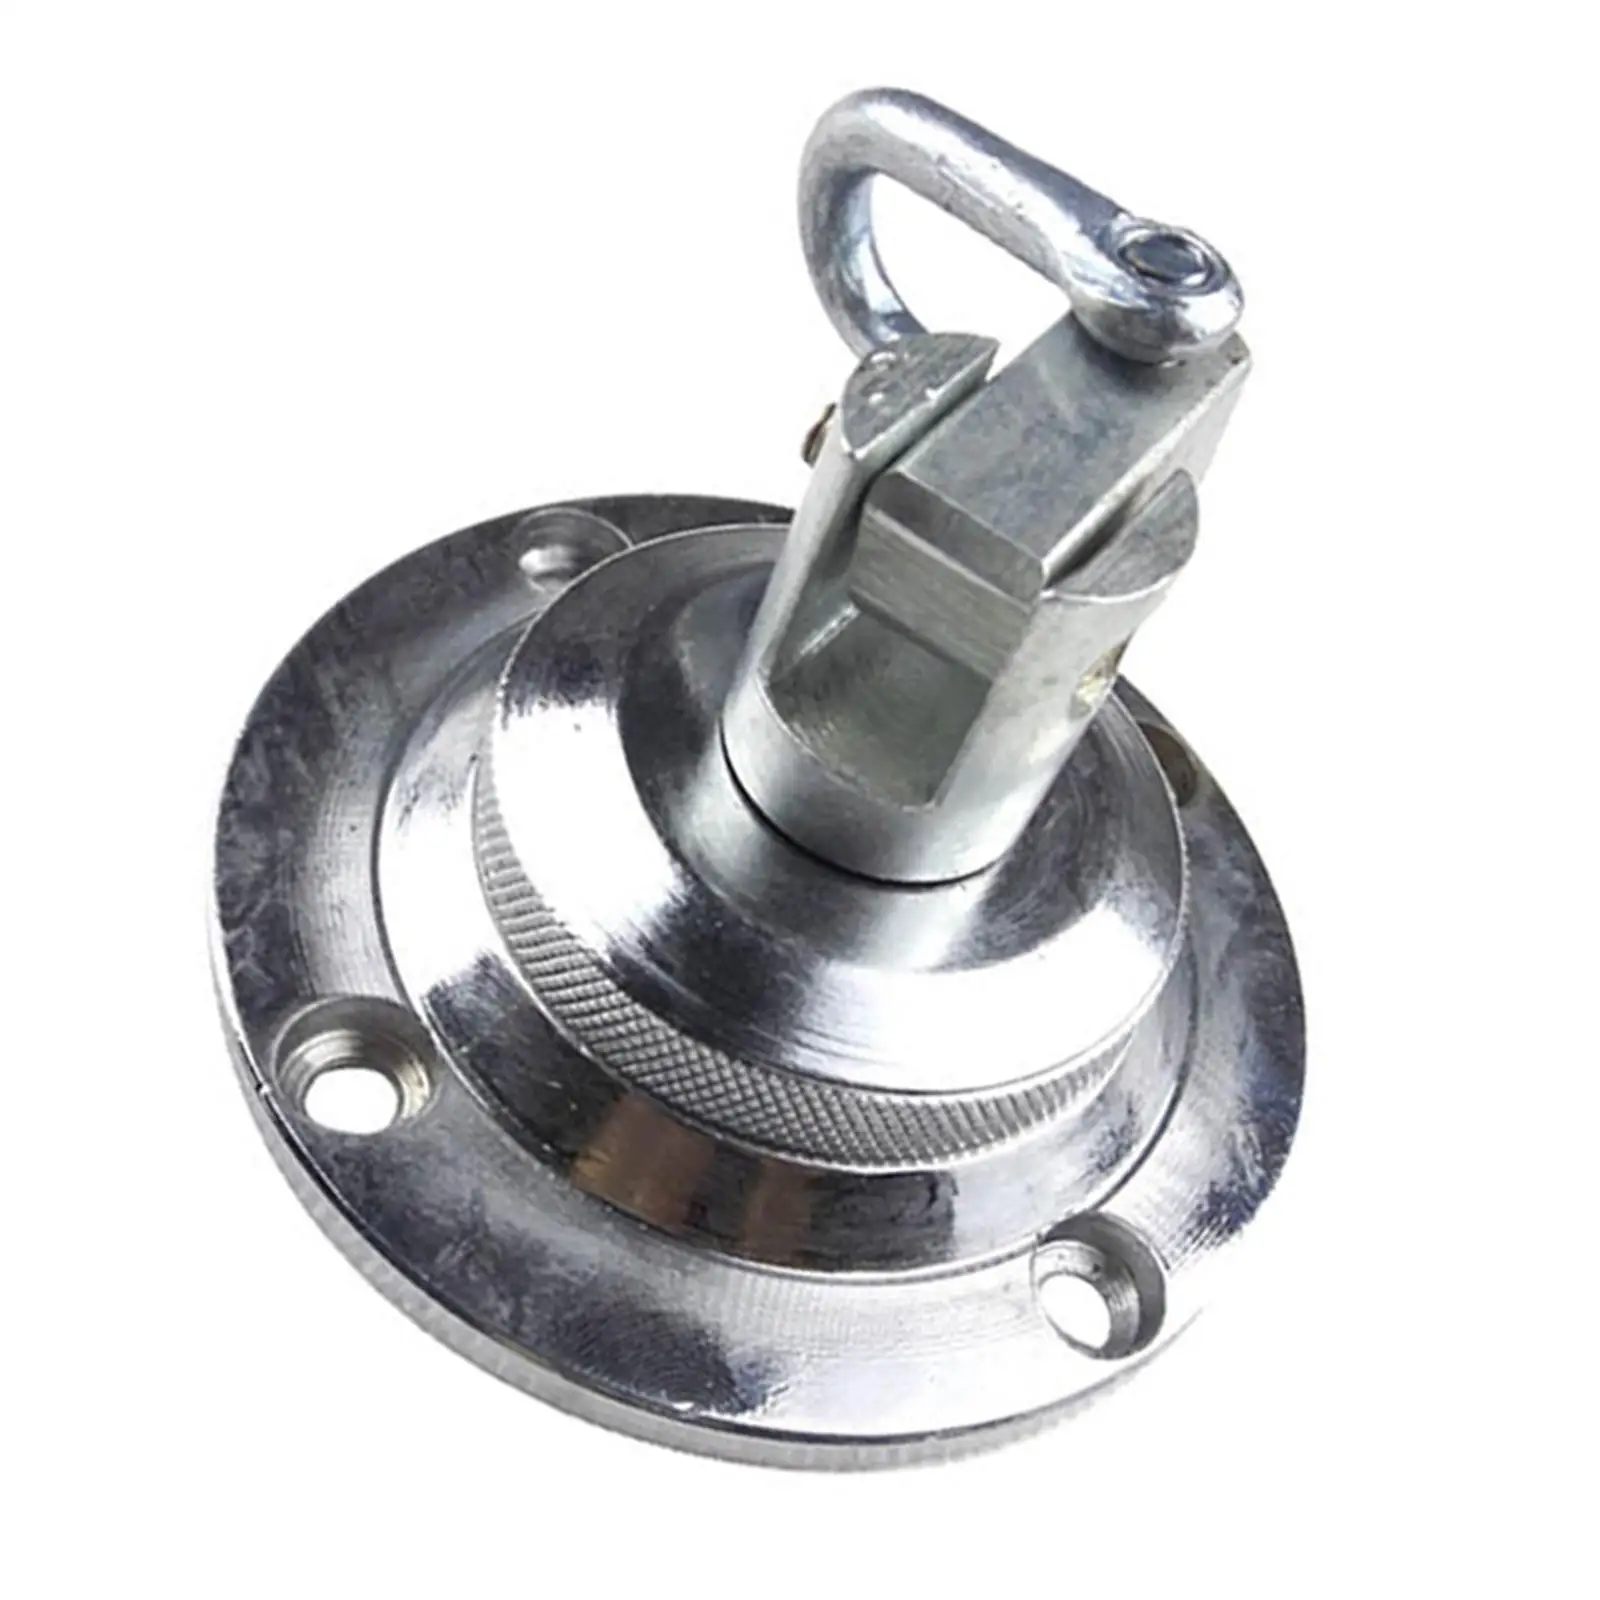 Steel Speed Ball Swivel Pear Ball Parts Premium 360 Rotatable Mounting Base Speed Ball Swivel for Boxing Punch Bag Training Mma